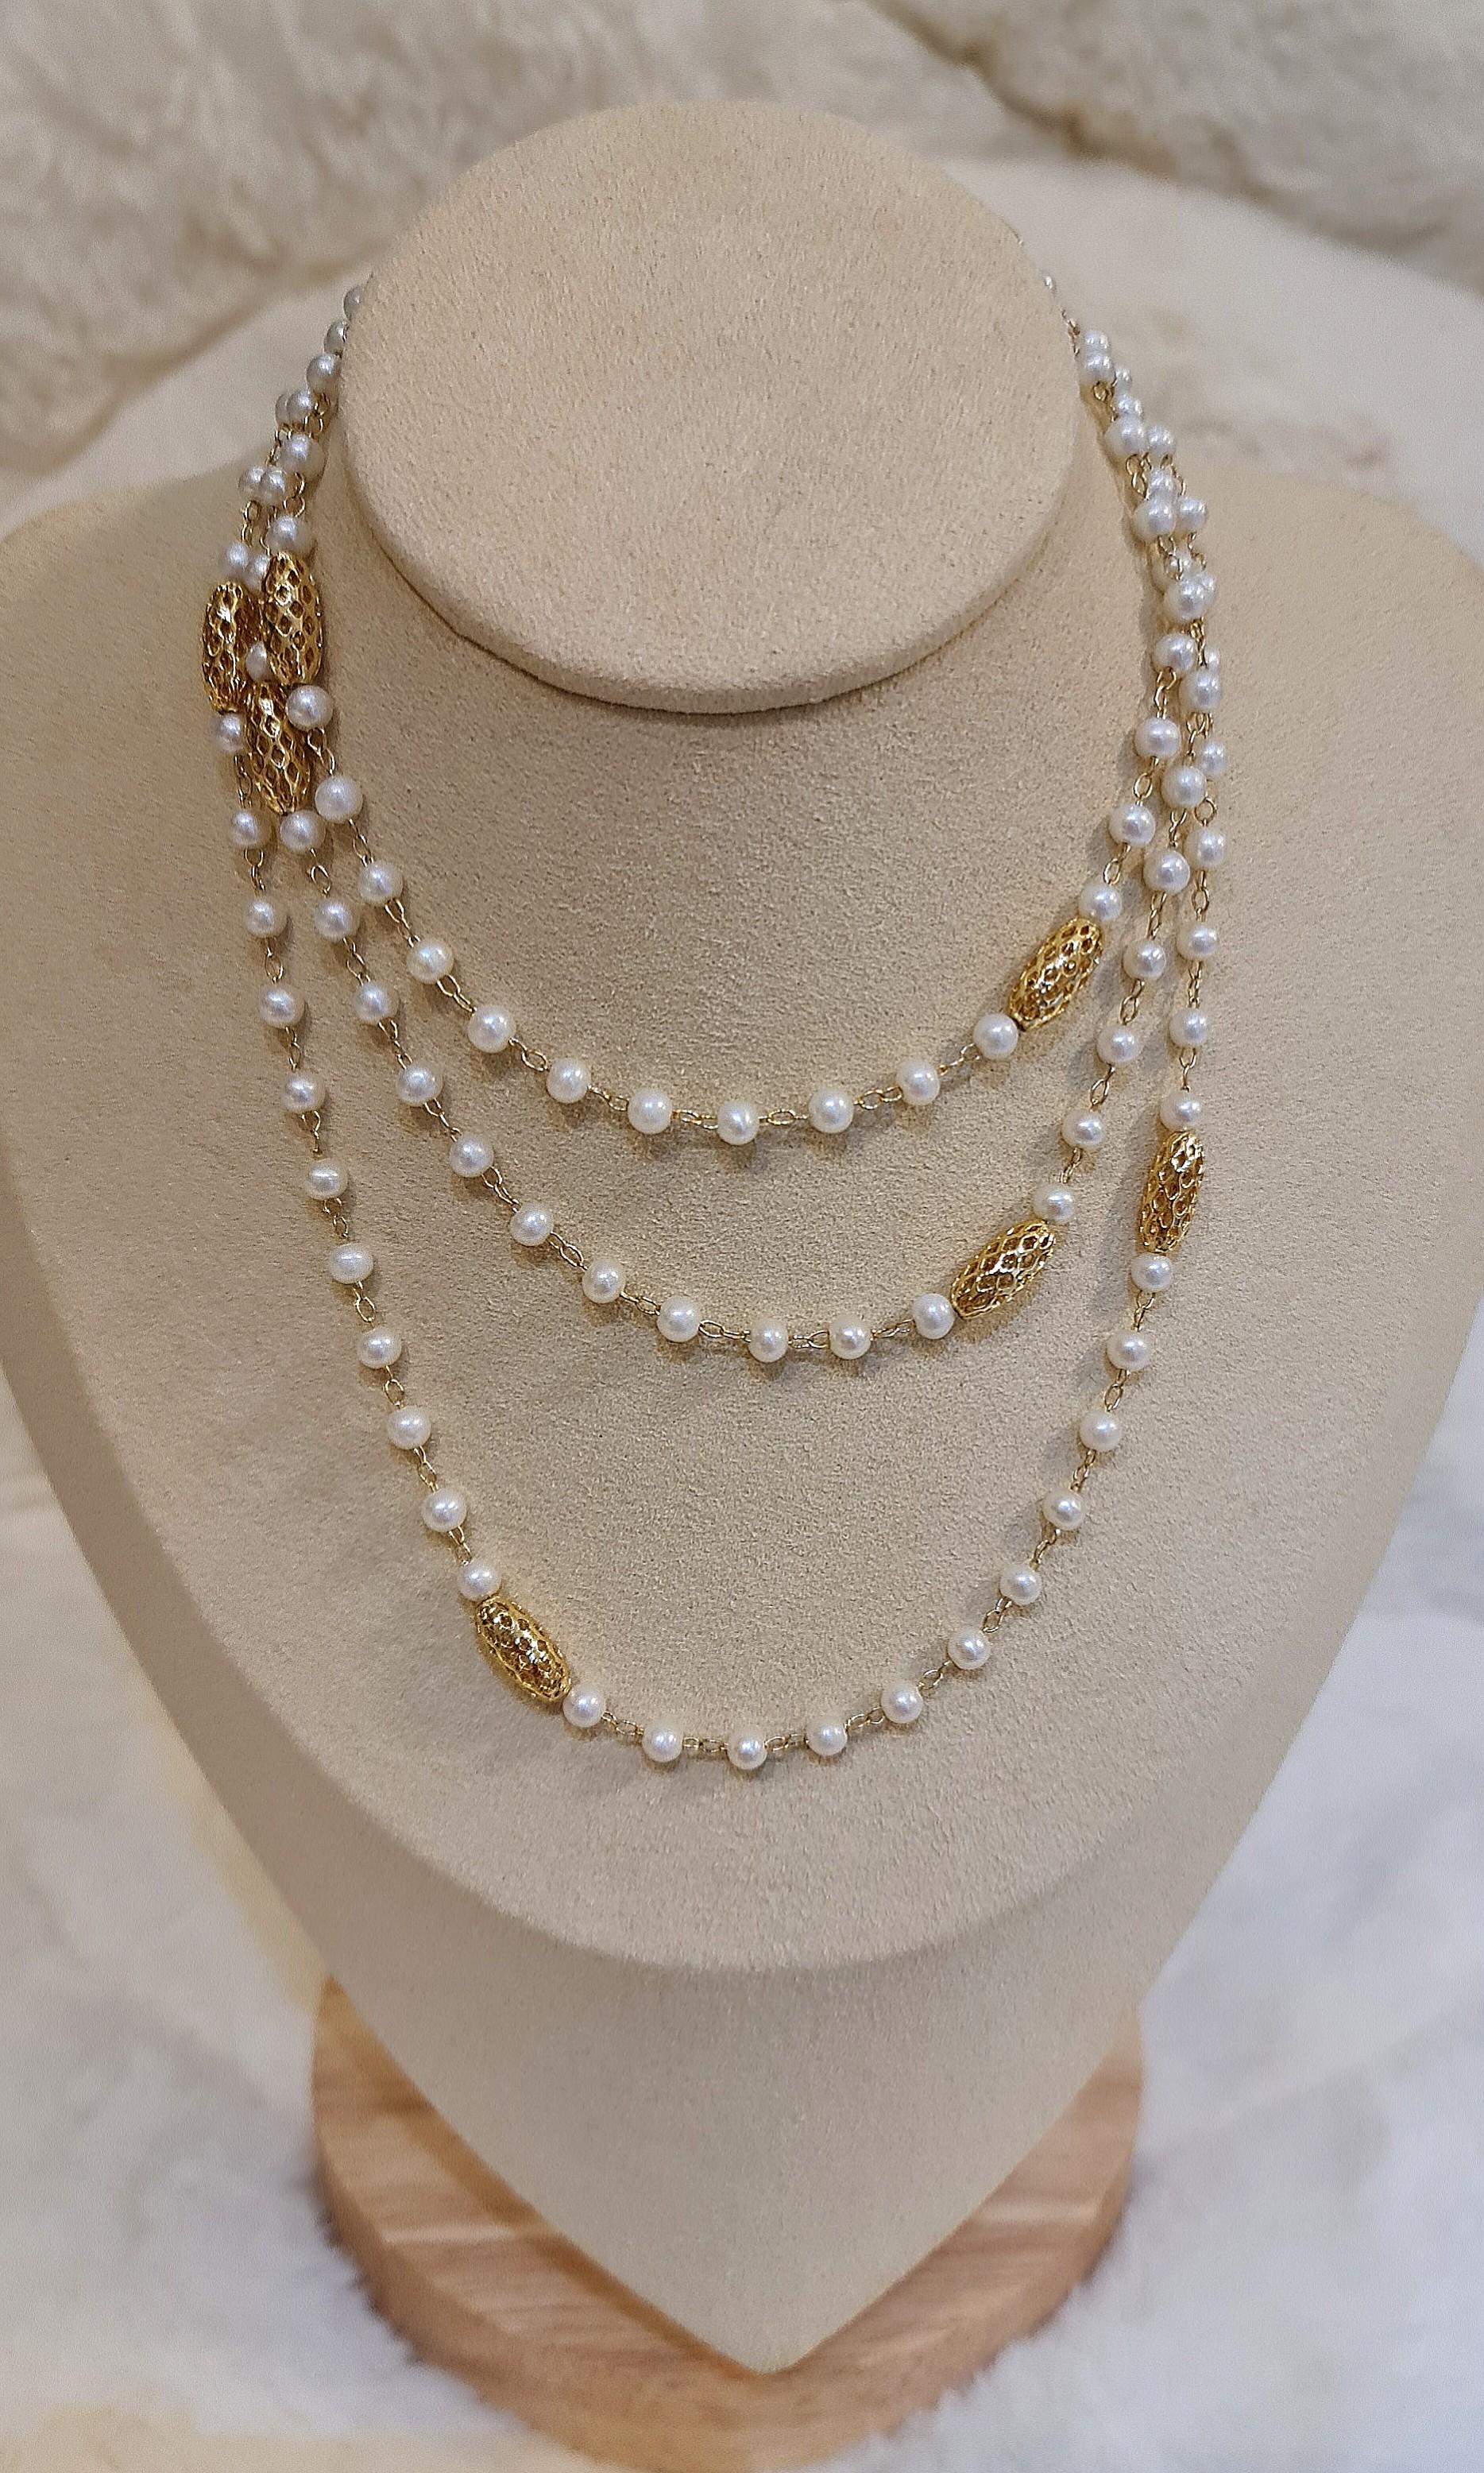 Vintage Made inITALY gold×pearl necklace詳細は画像をご覧ください